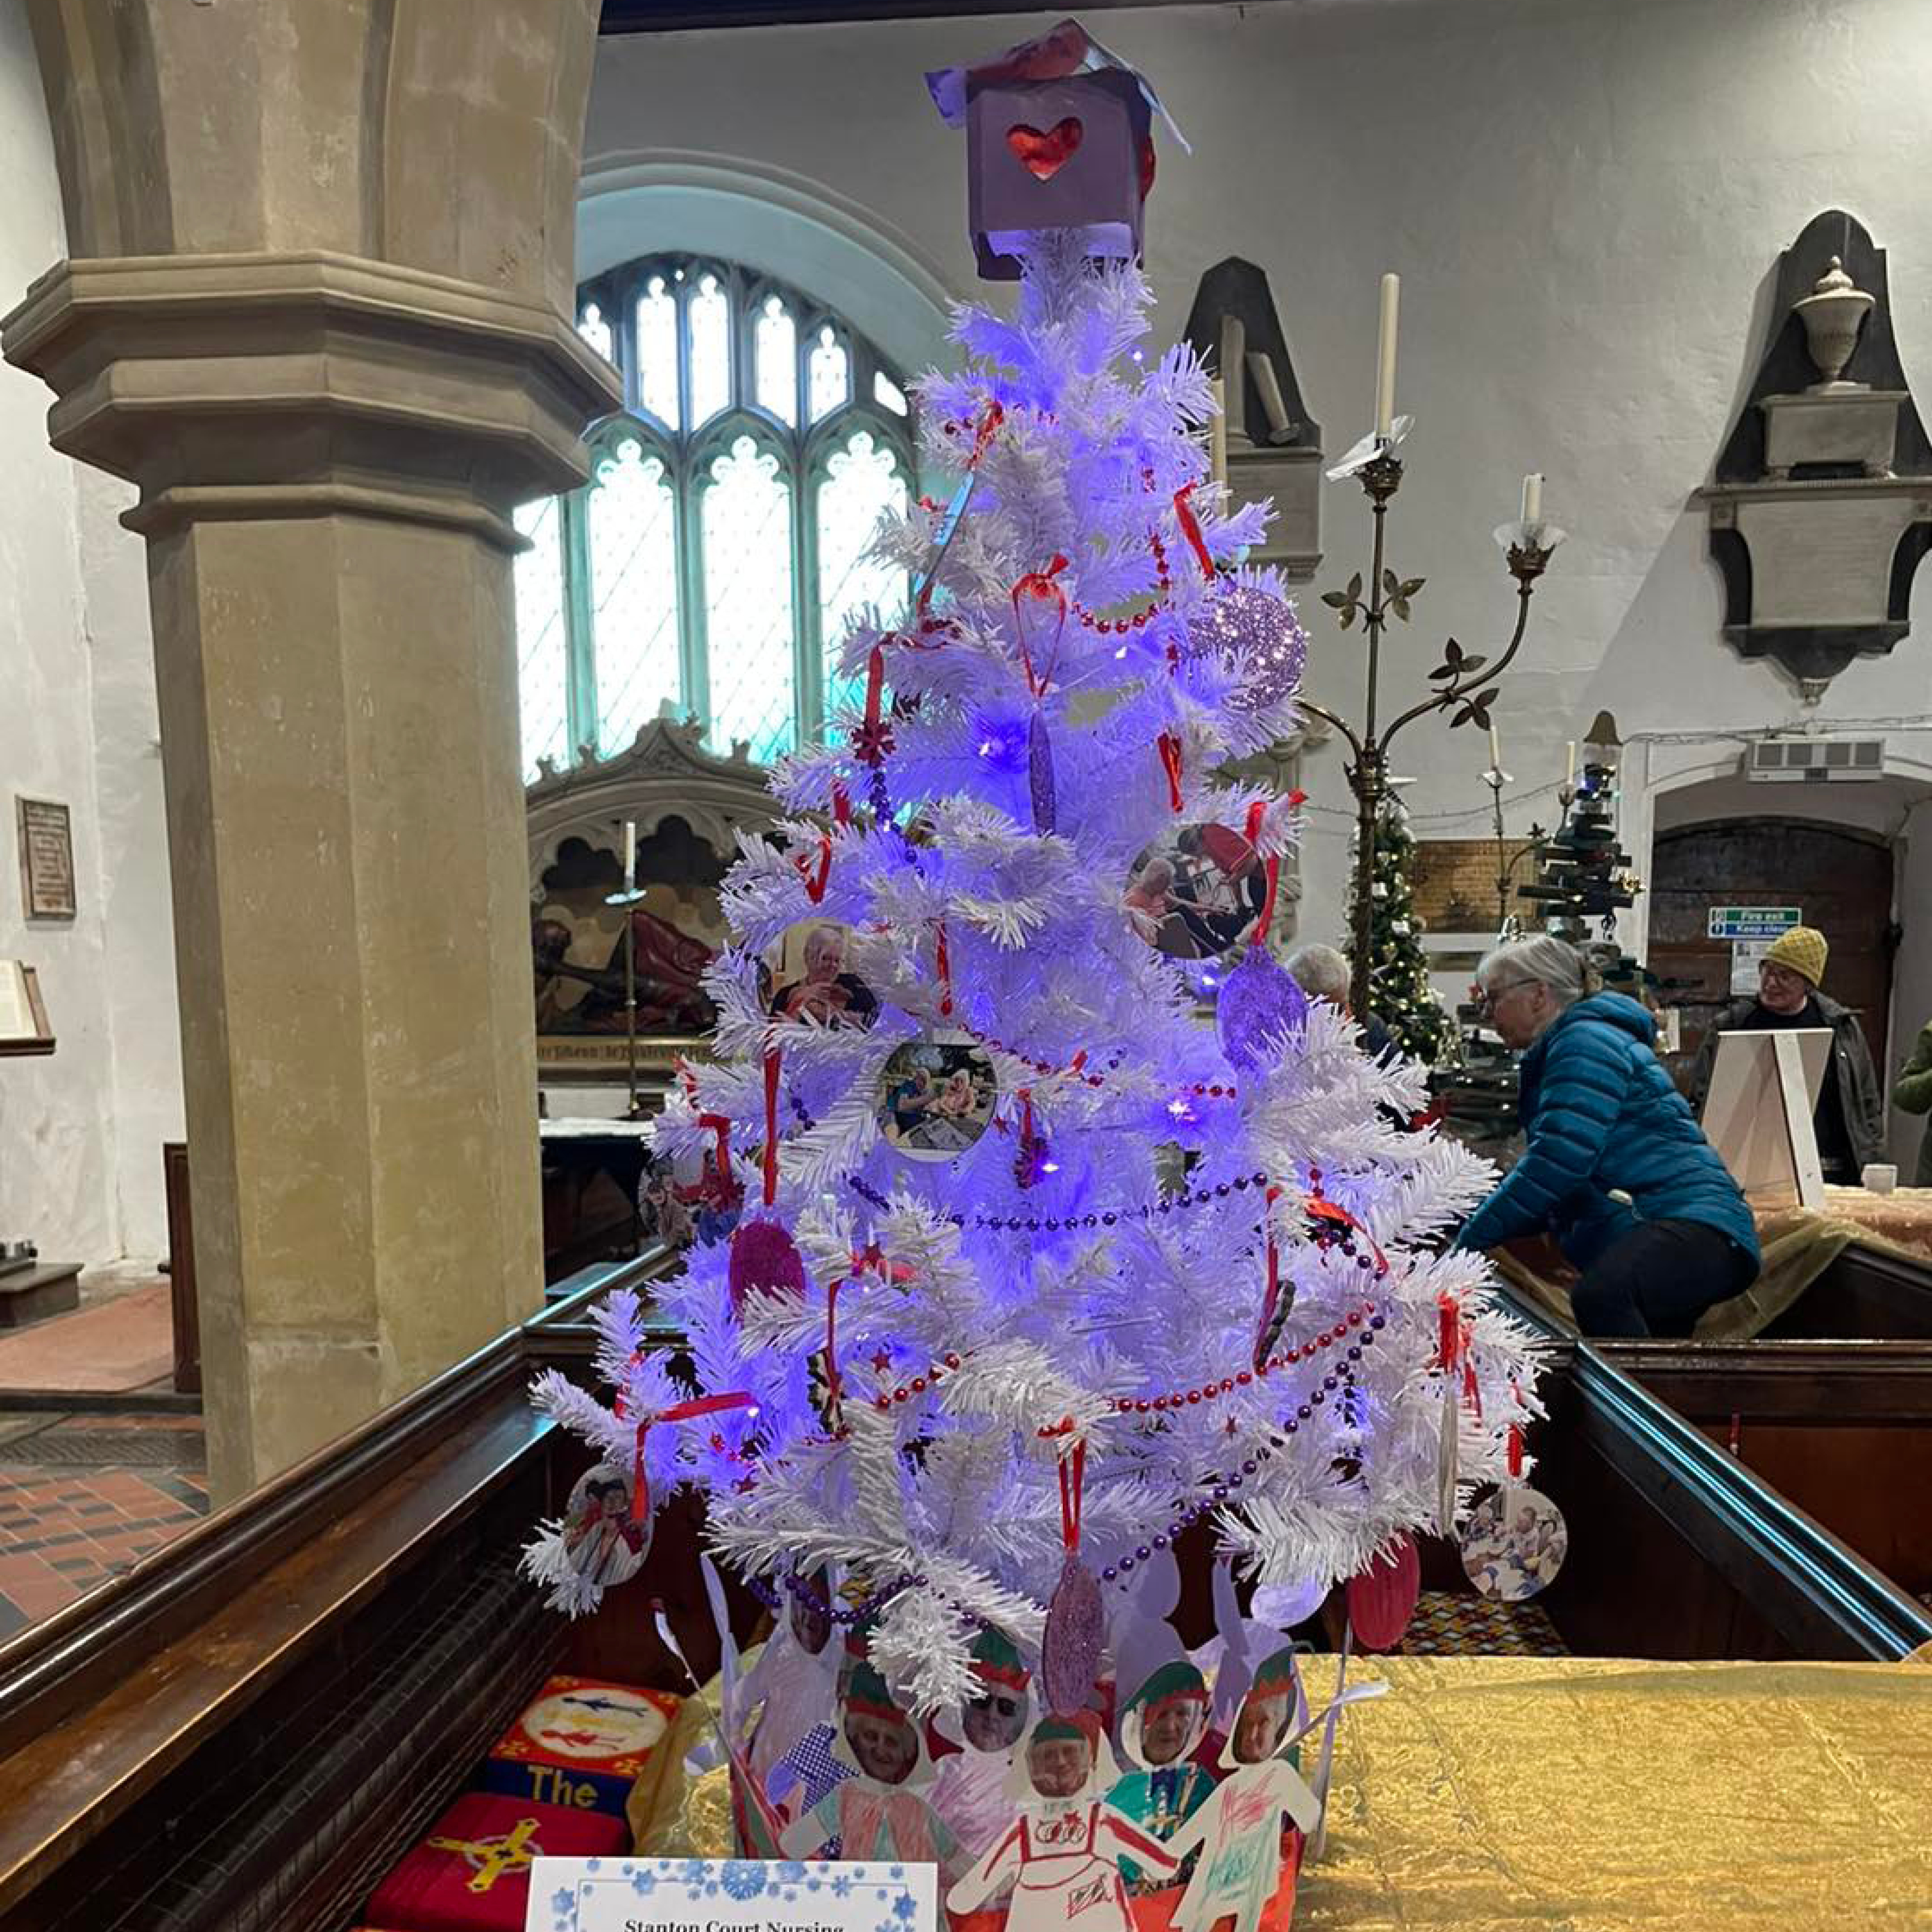 Stanton Court Take Part in Chew Magna’s Christmas Tree Festival